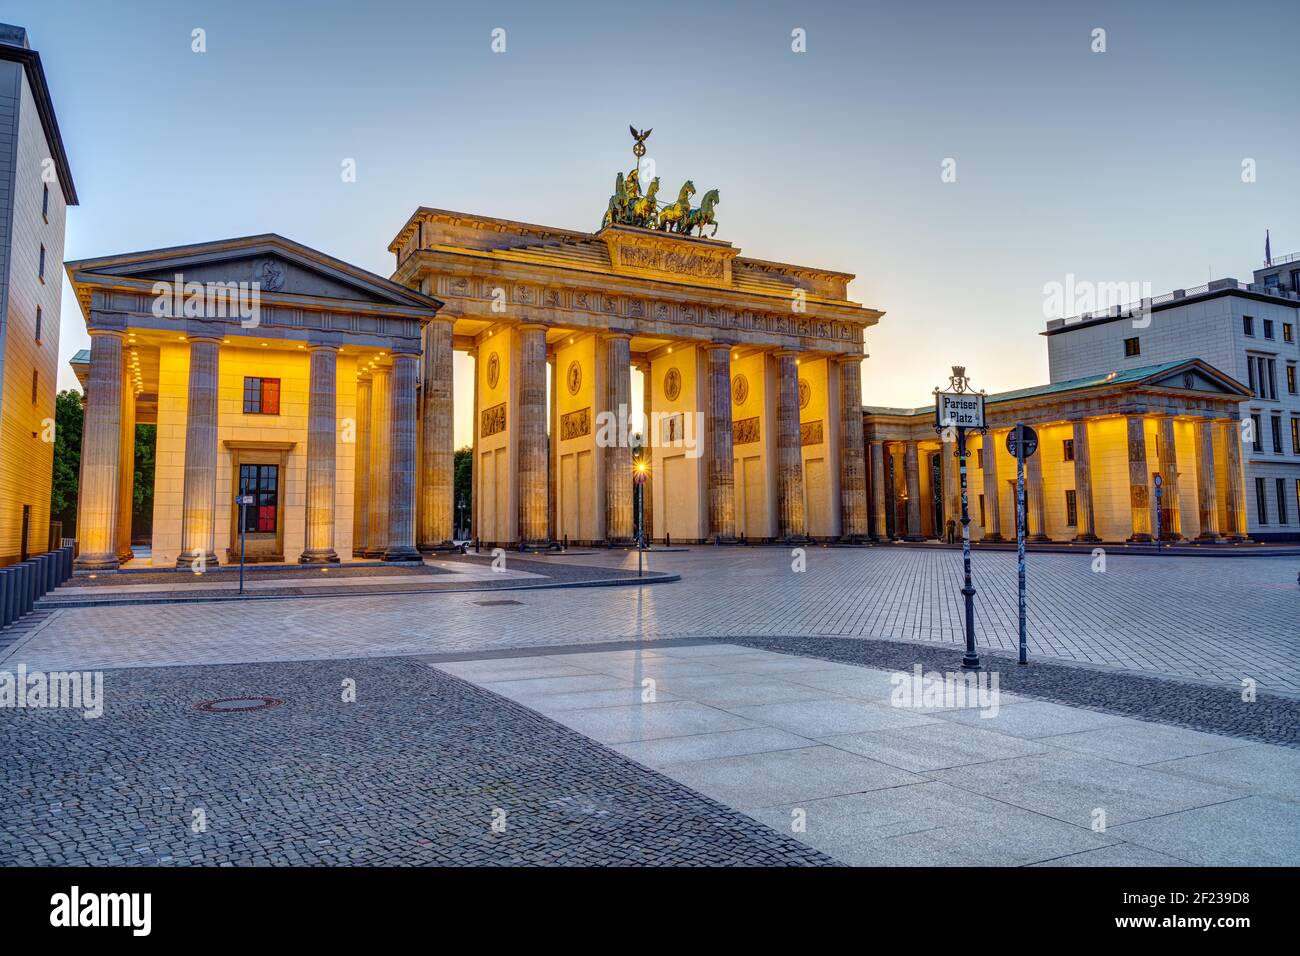 The famous illuminated Brandenburg Gate in Berlin at sunset with no people Stock Photo